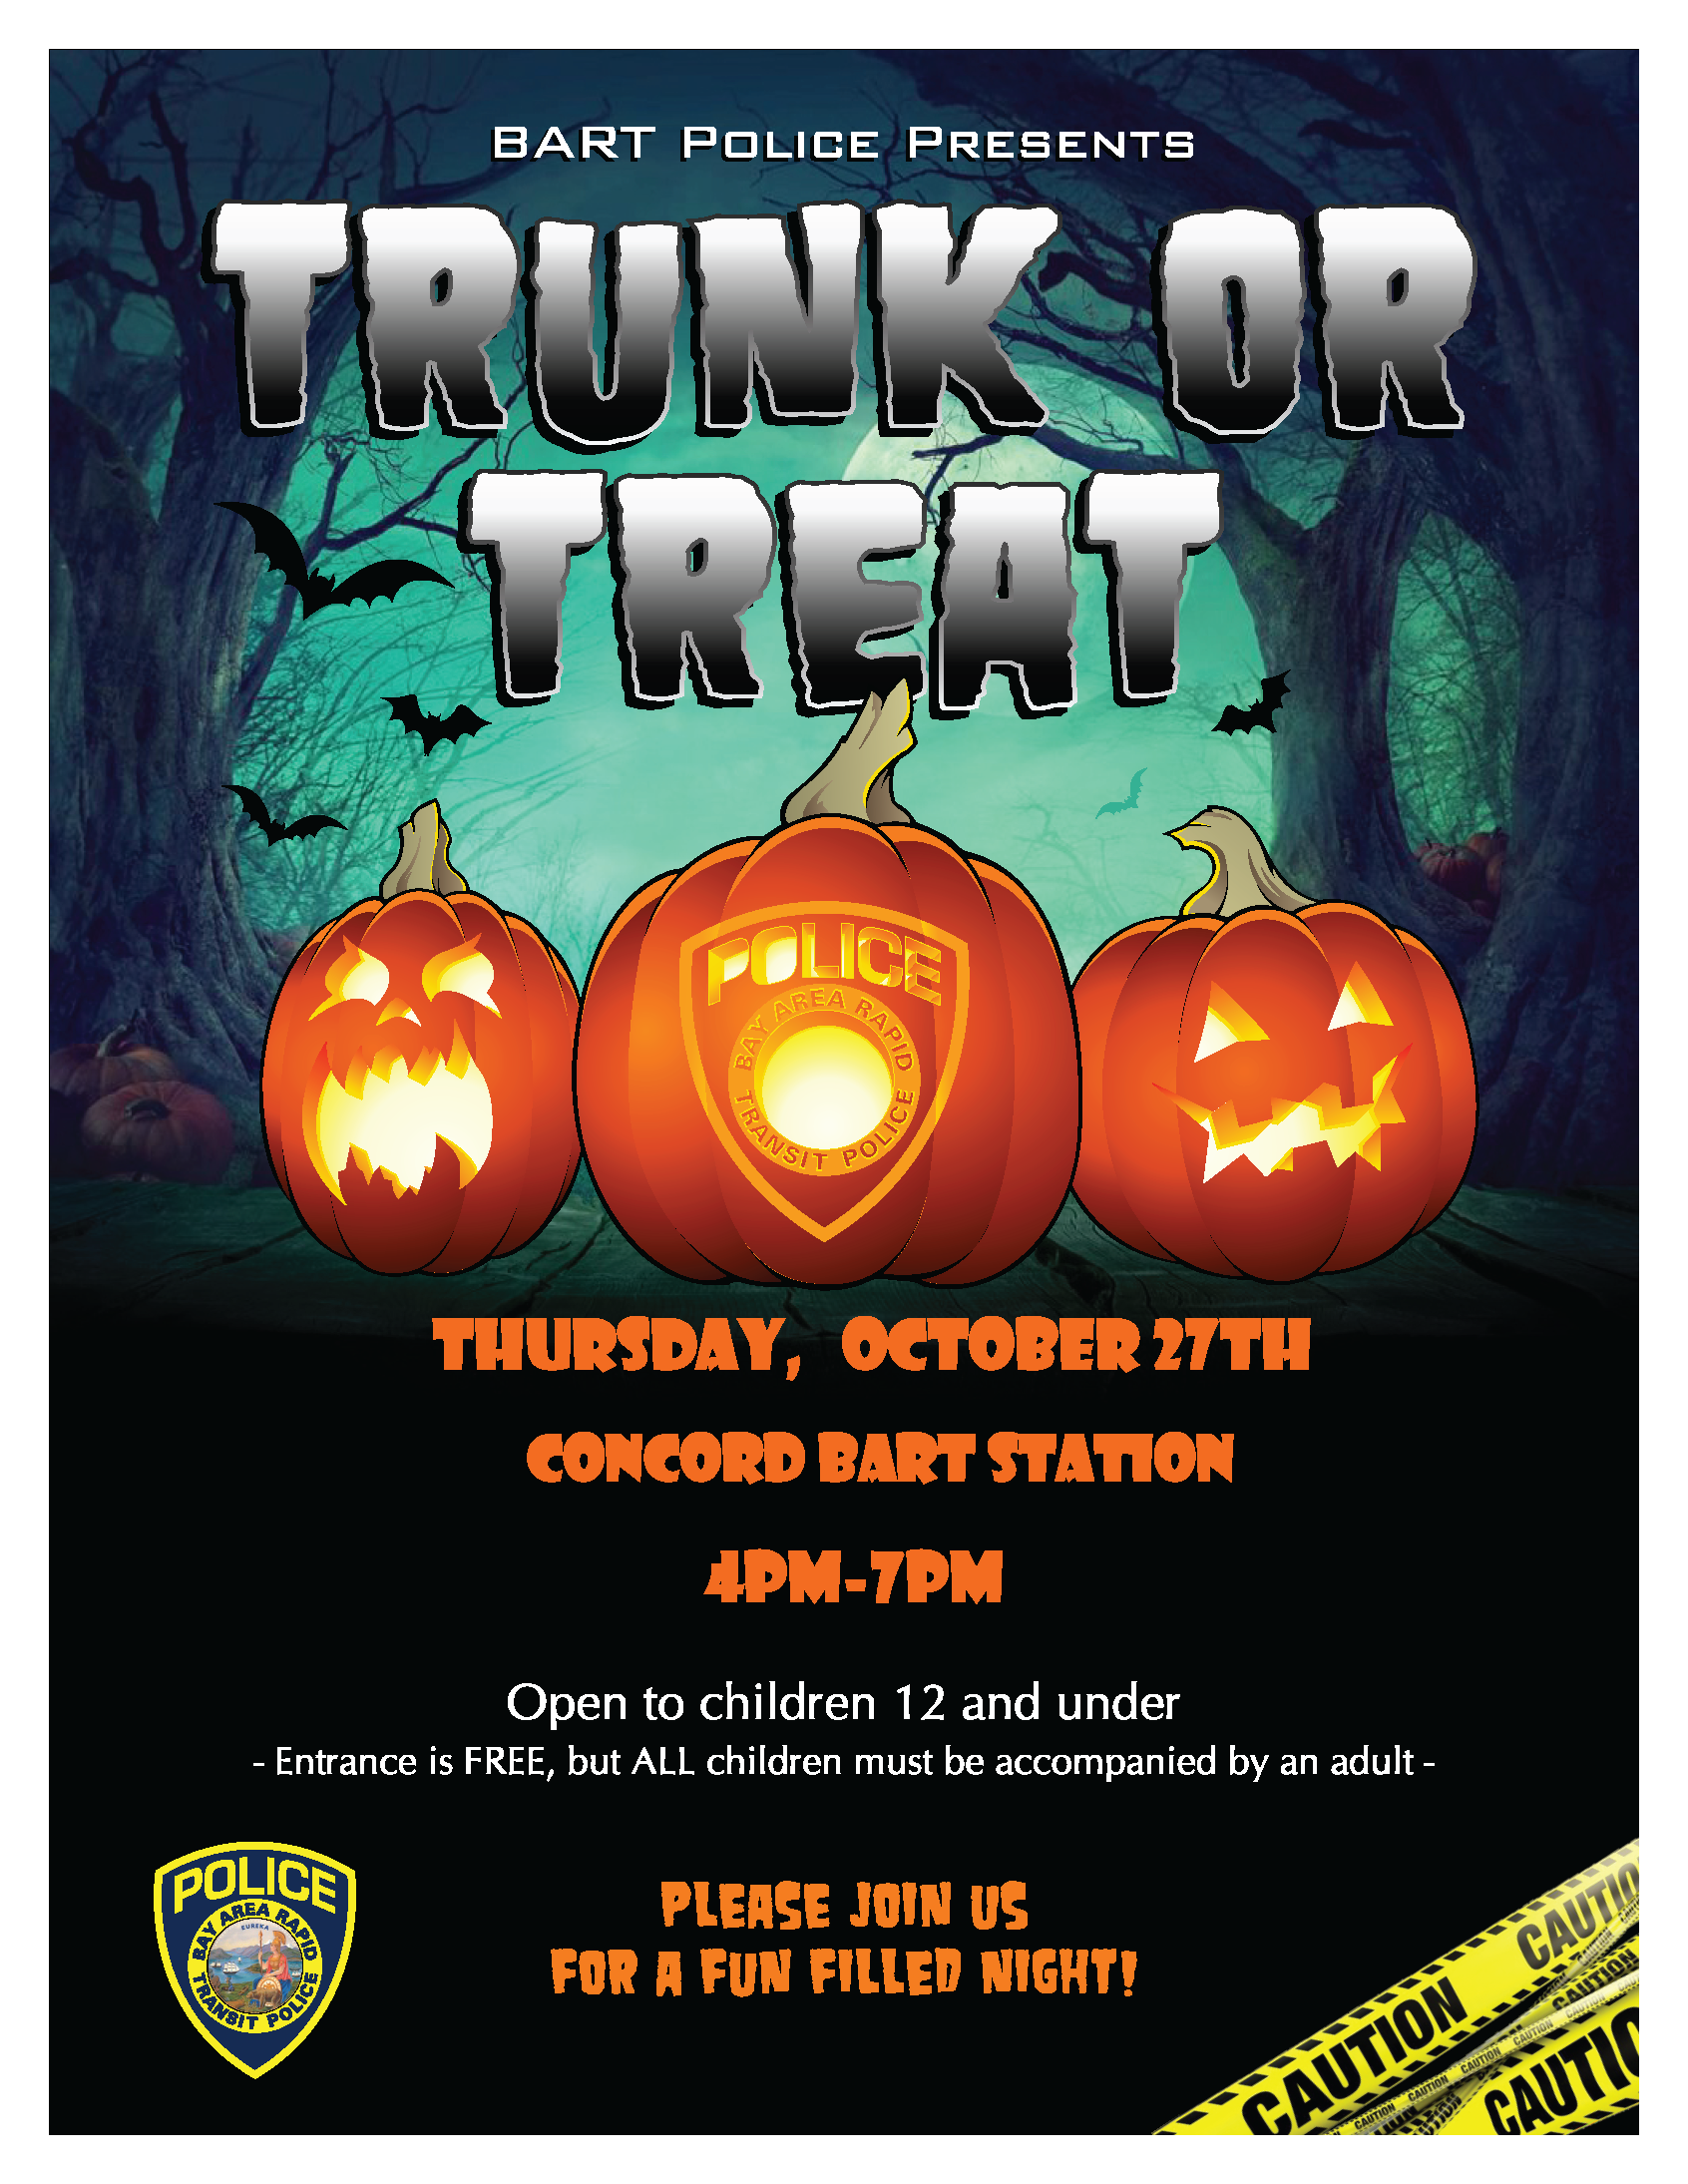 BPD Trunk or Treat is Thursday, October 27th at Concord BART station from 4pm-7pm